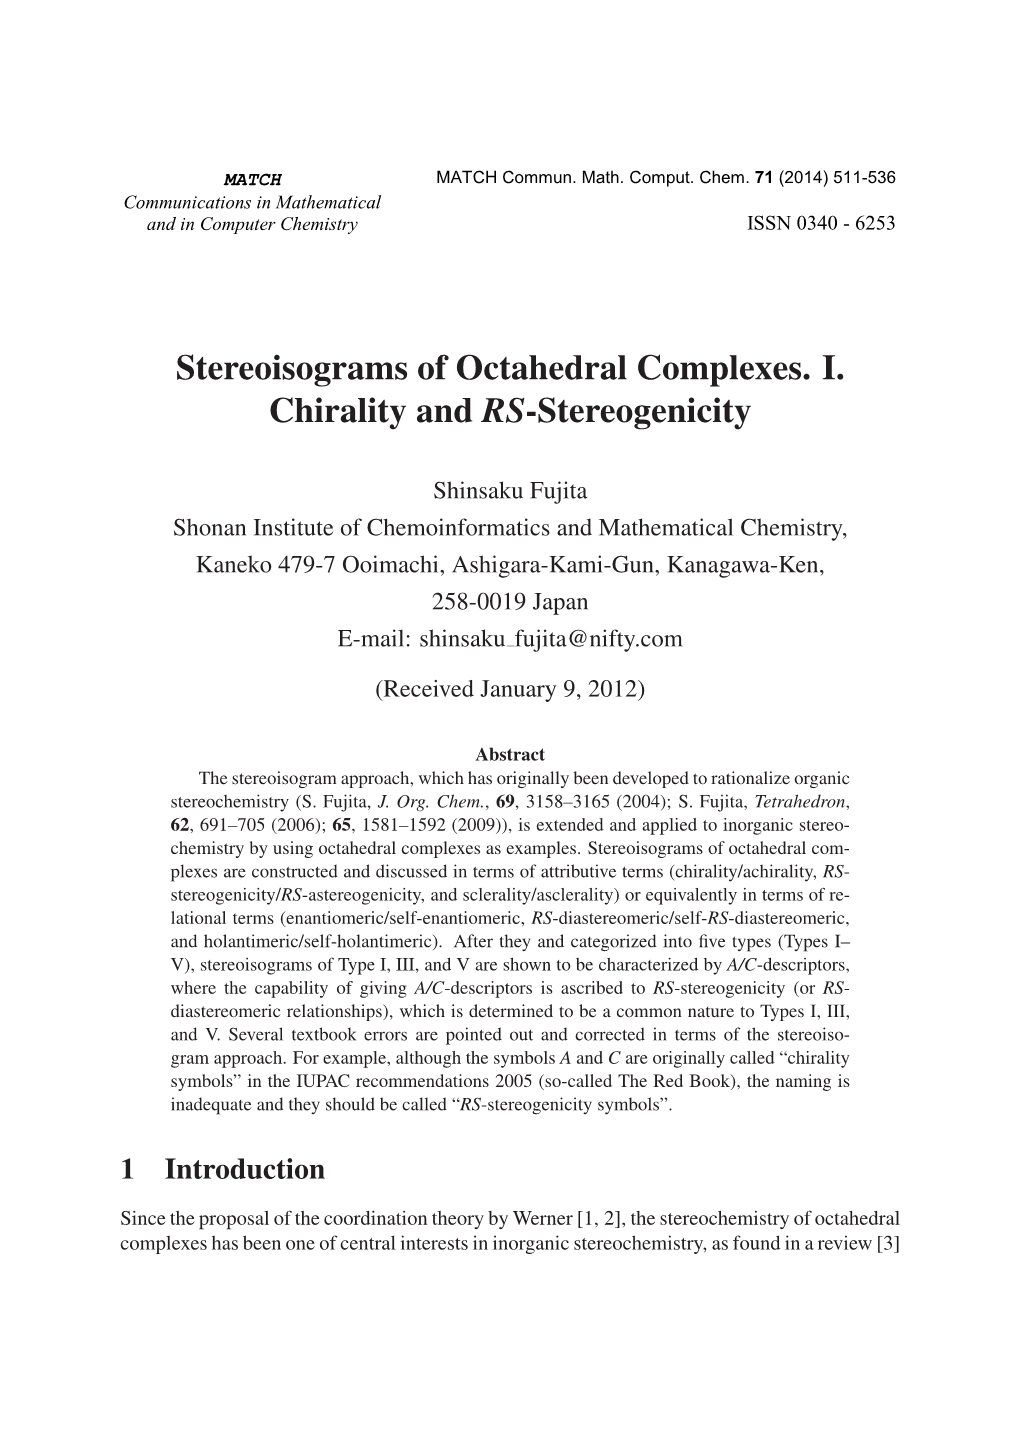 Stereoisograms of Octahedral Complexes. I. Chirality and RS-Stereogenicity